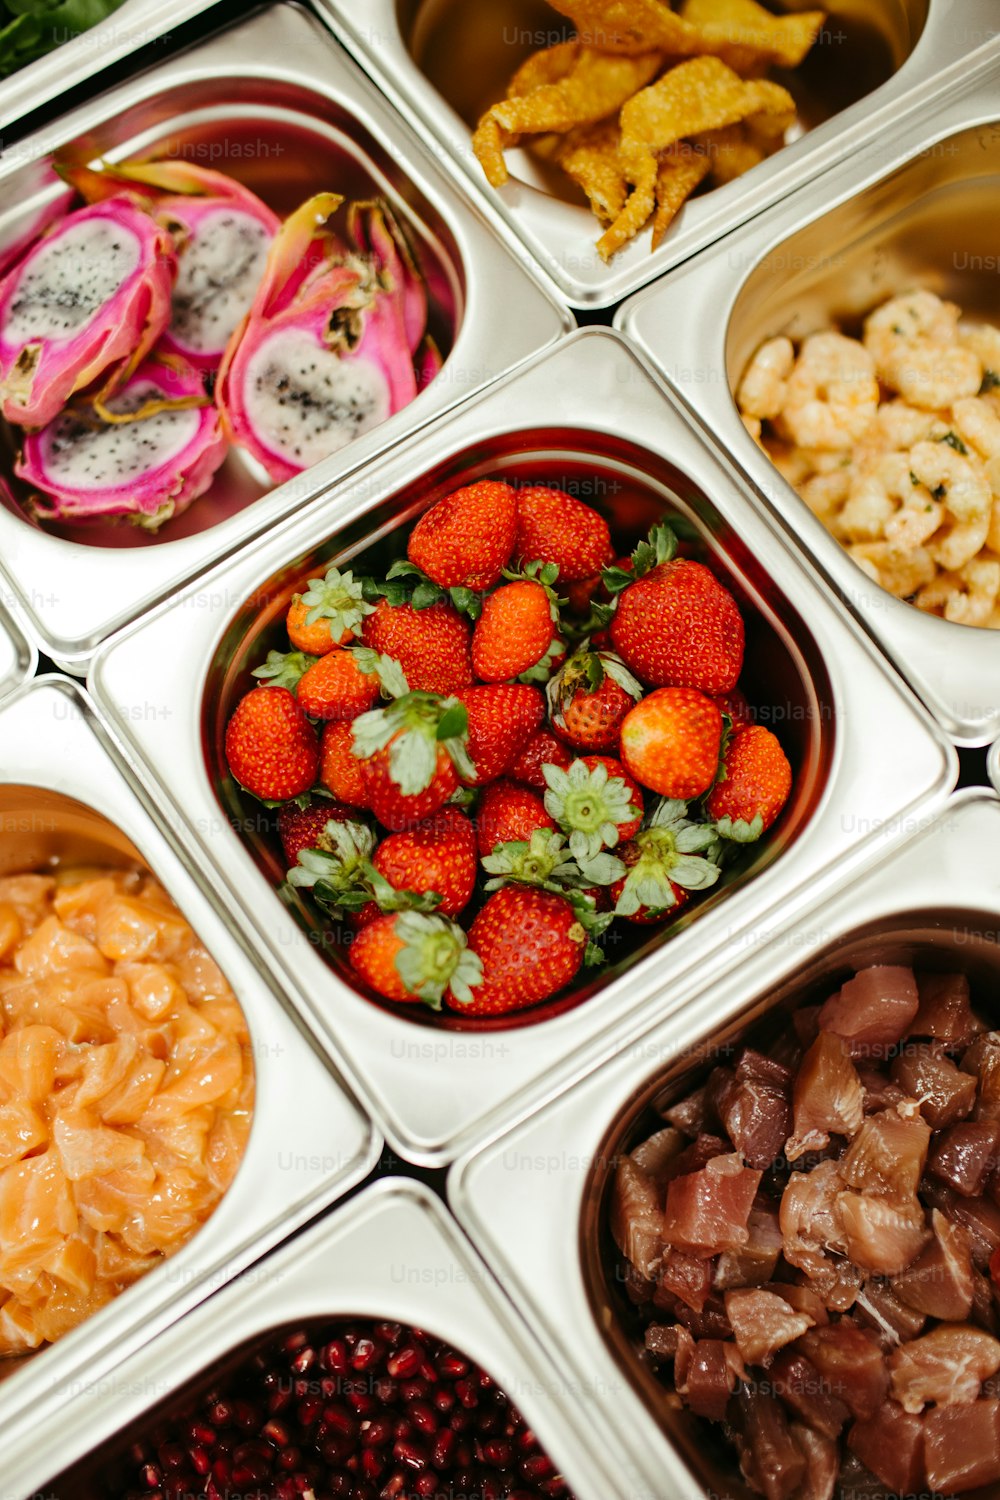 a close up of a tray of food with fruits and vegetables